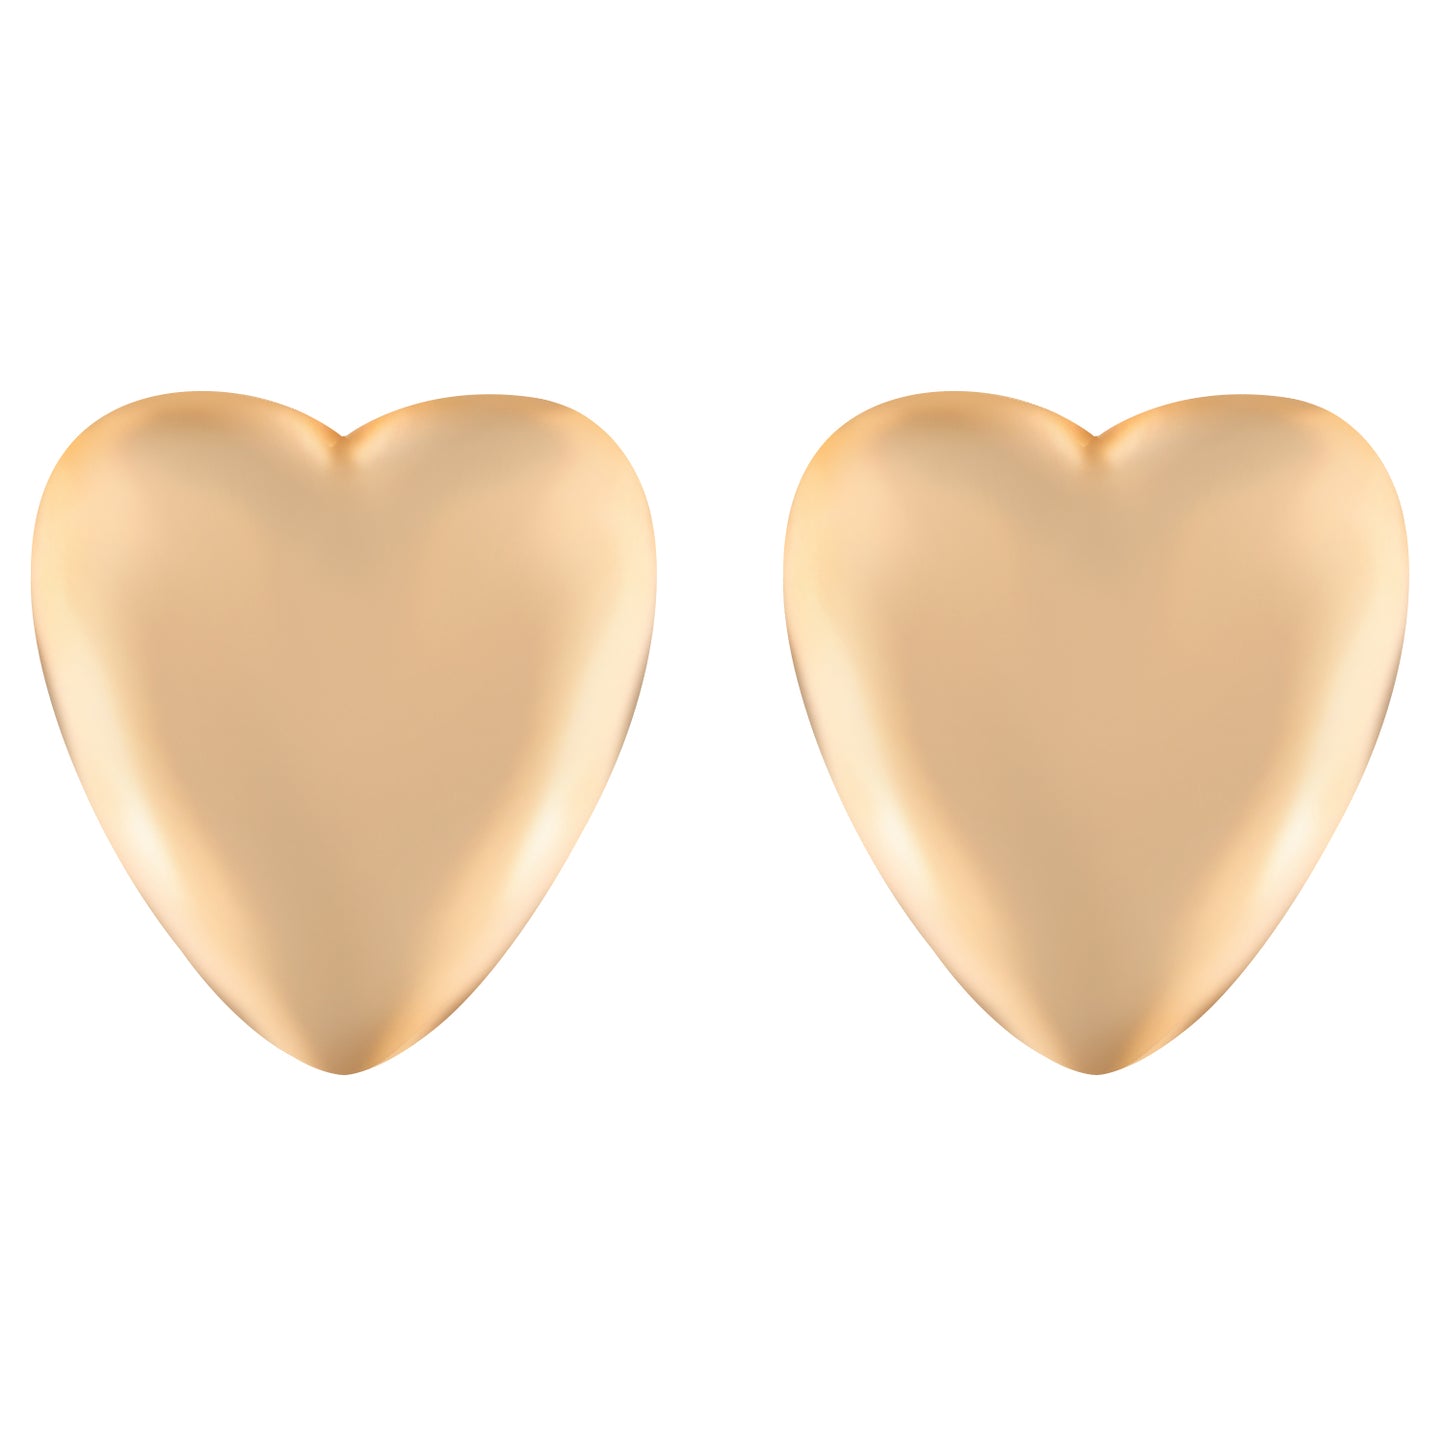 Alilang 14K Gold Plated Heart Shapes Stud Earrings with 925 Sterling Silver Post for Womens Girls Sensitive Ears